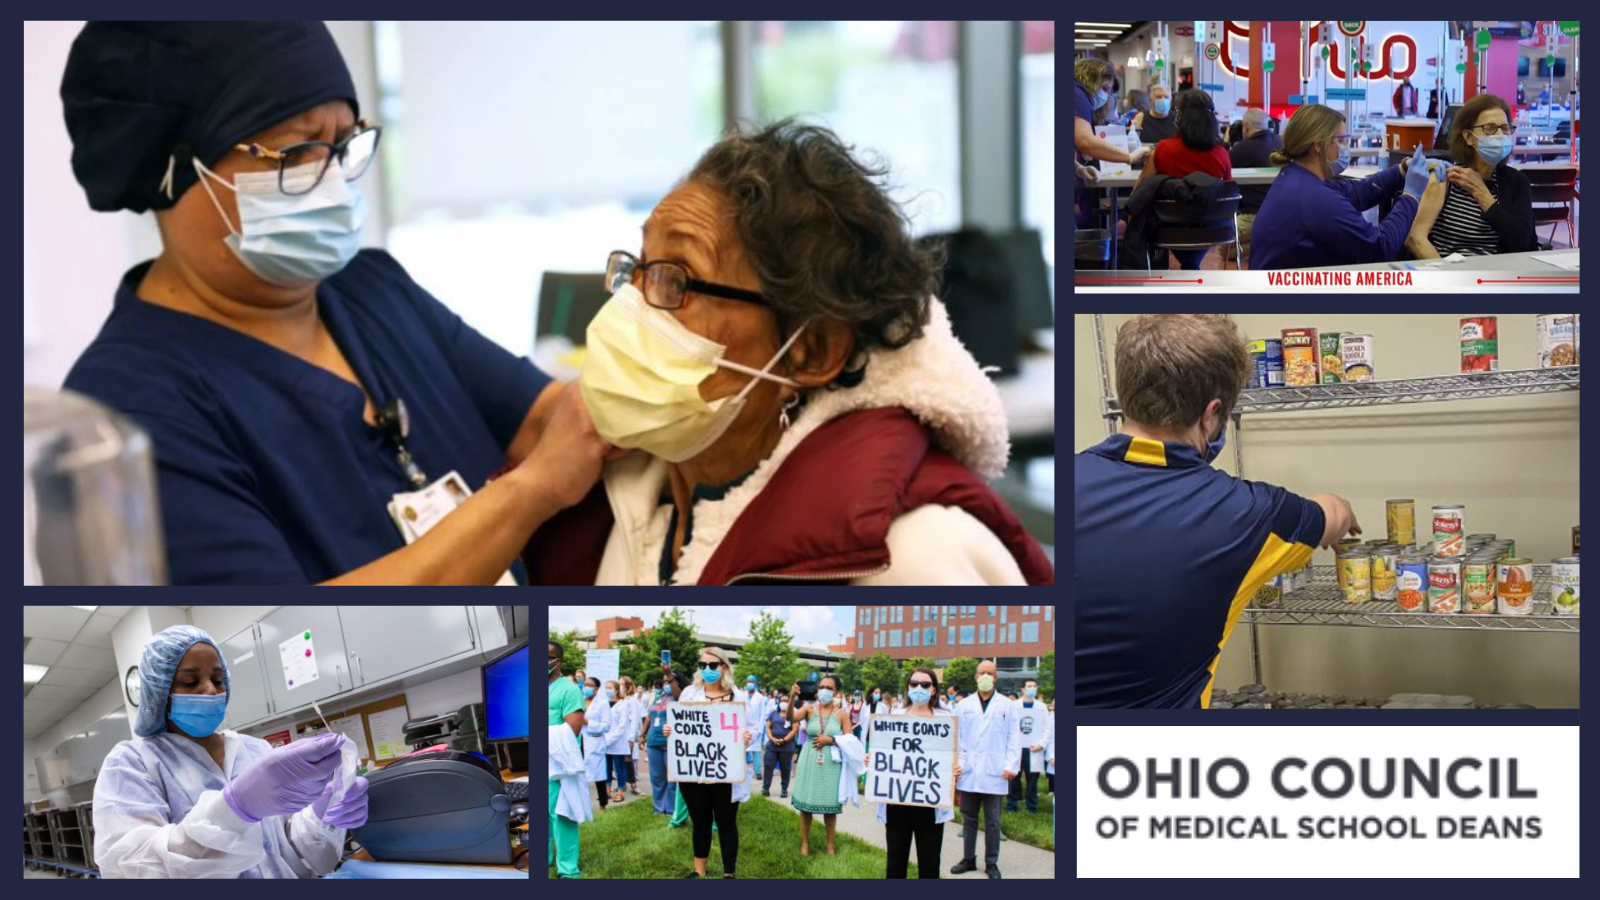 One year in with hope on the horizon, Ohio’s Colleges of Medicine double down in frontline fight against COVID-19